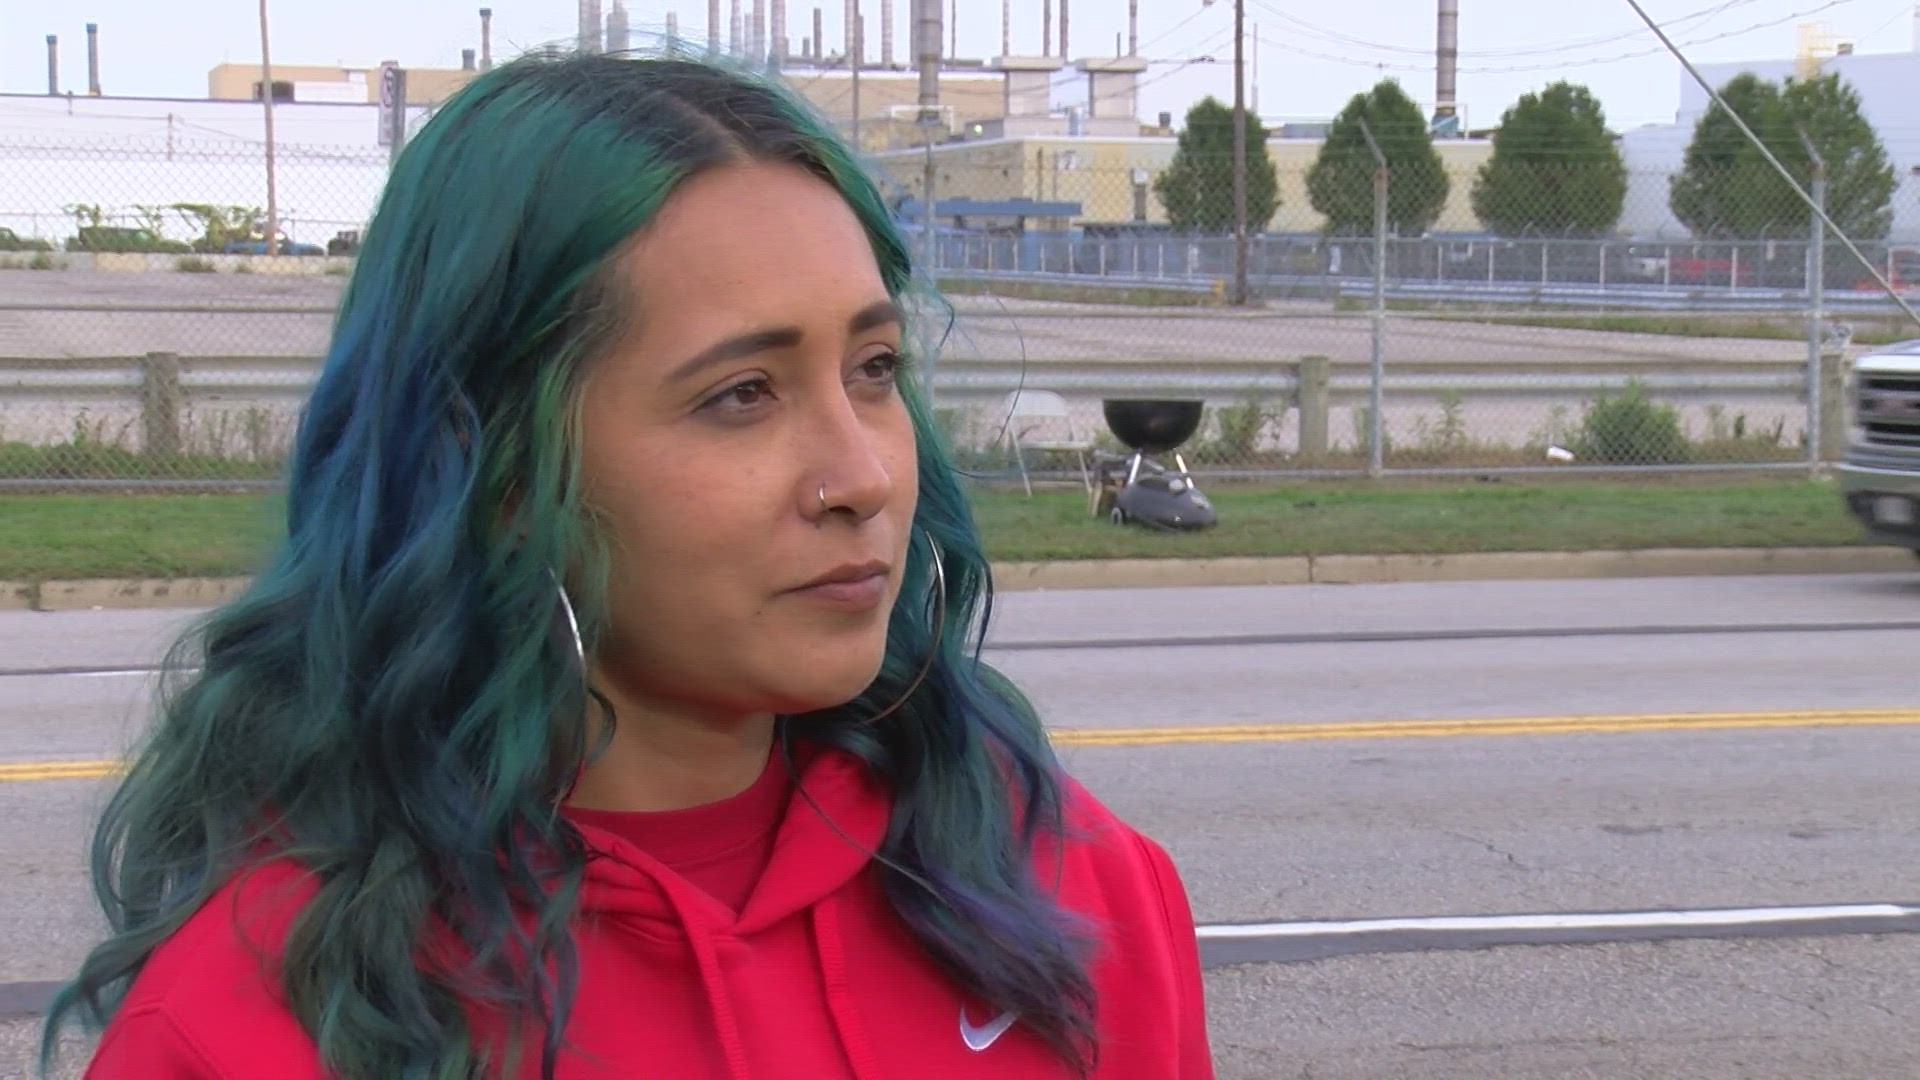 Abigail Garcia has been working at Jeep for over 4 years. She says she has to maintain a second job due to relatively low pay and unpredictable hours at the plant.